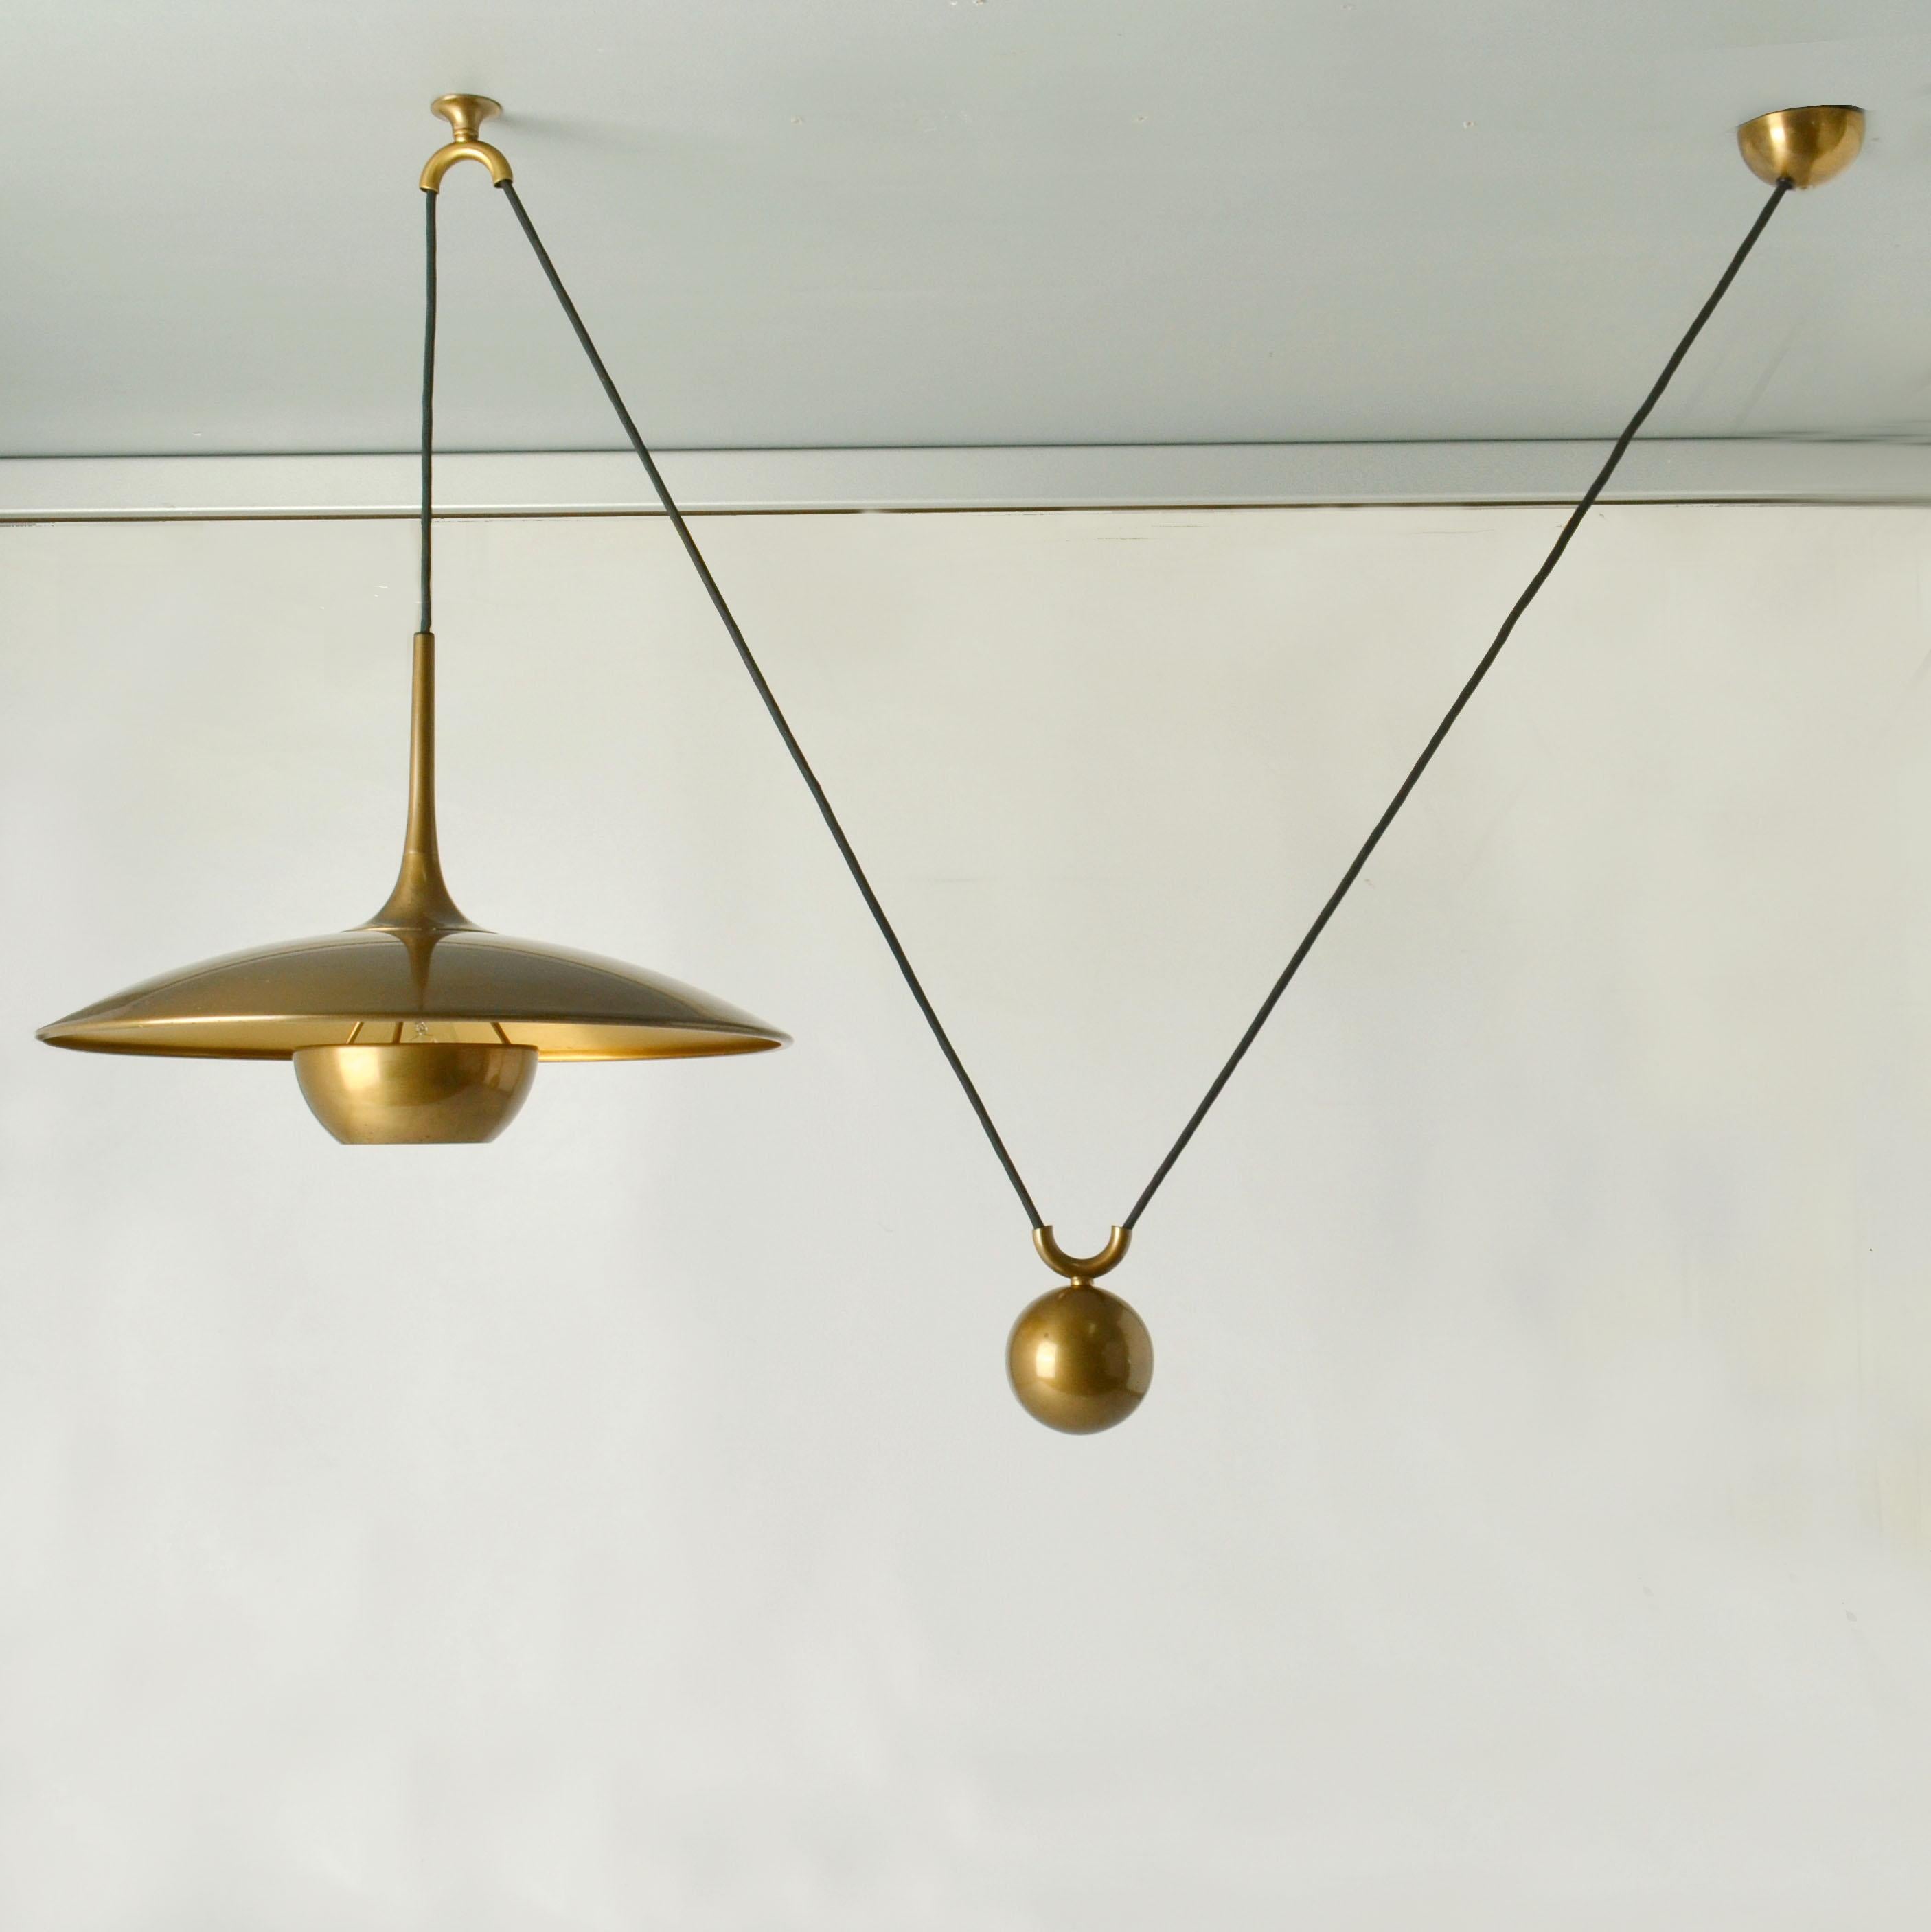 German Pendant Lamp Onos 40 in Brass by Florian Schulz 1960's, Counterbalance